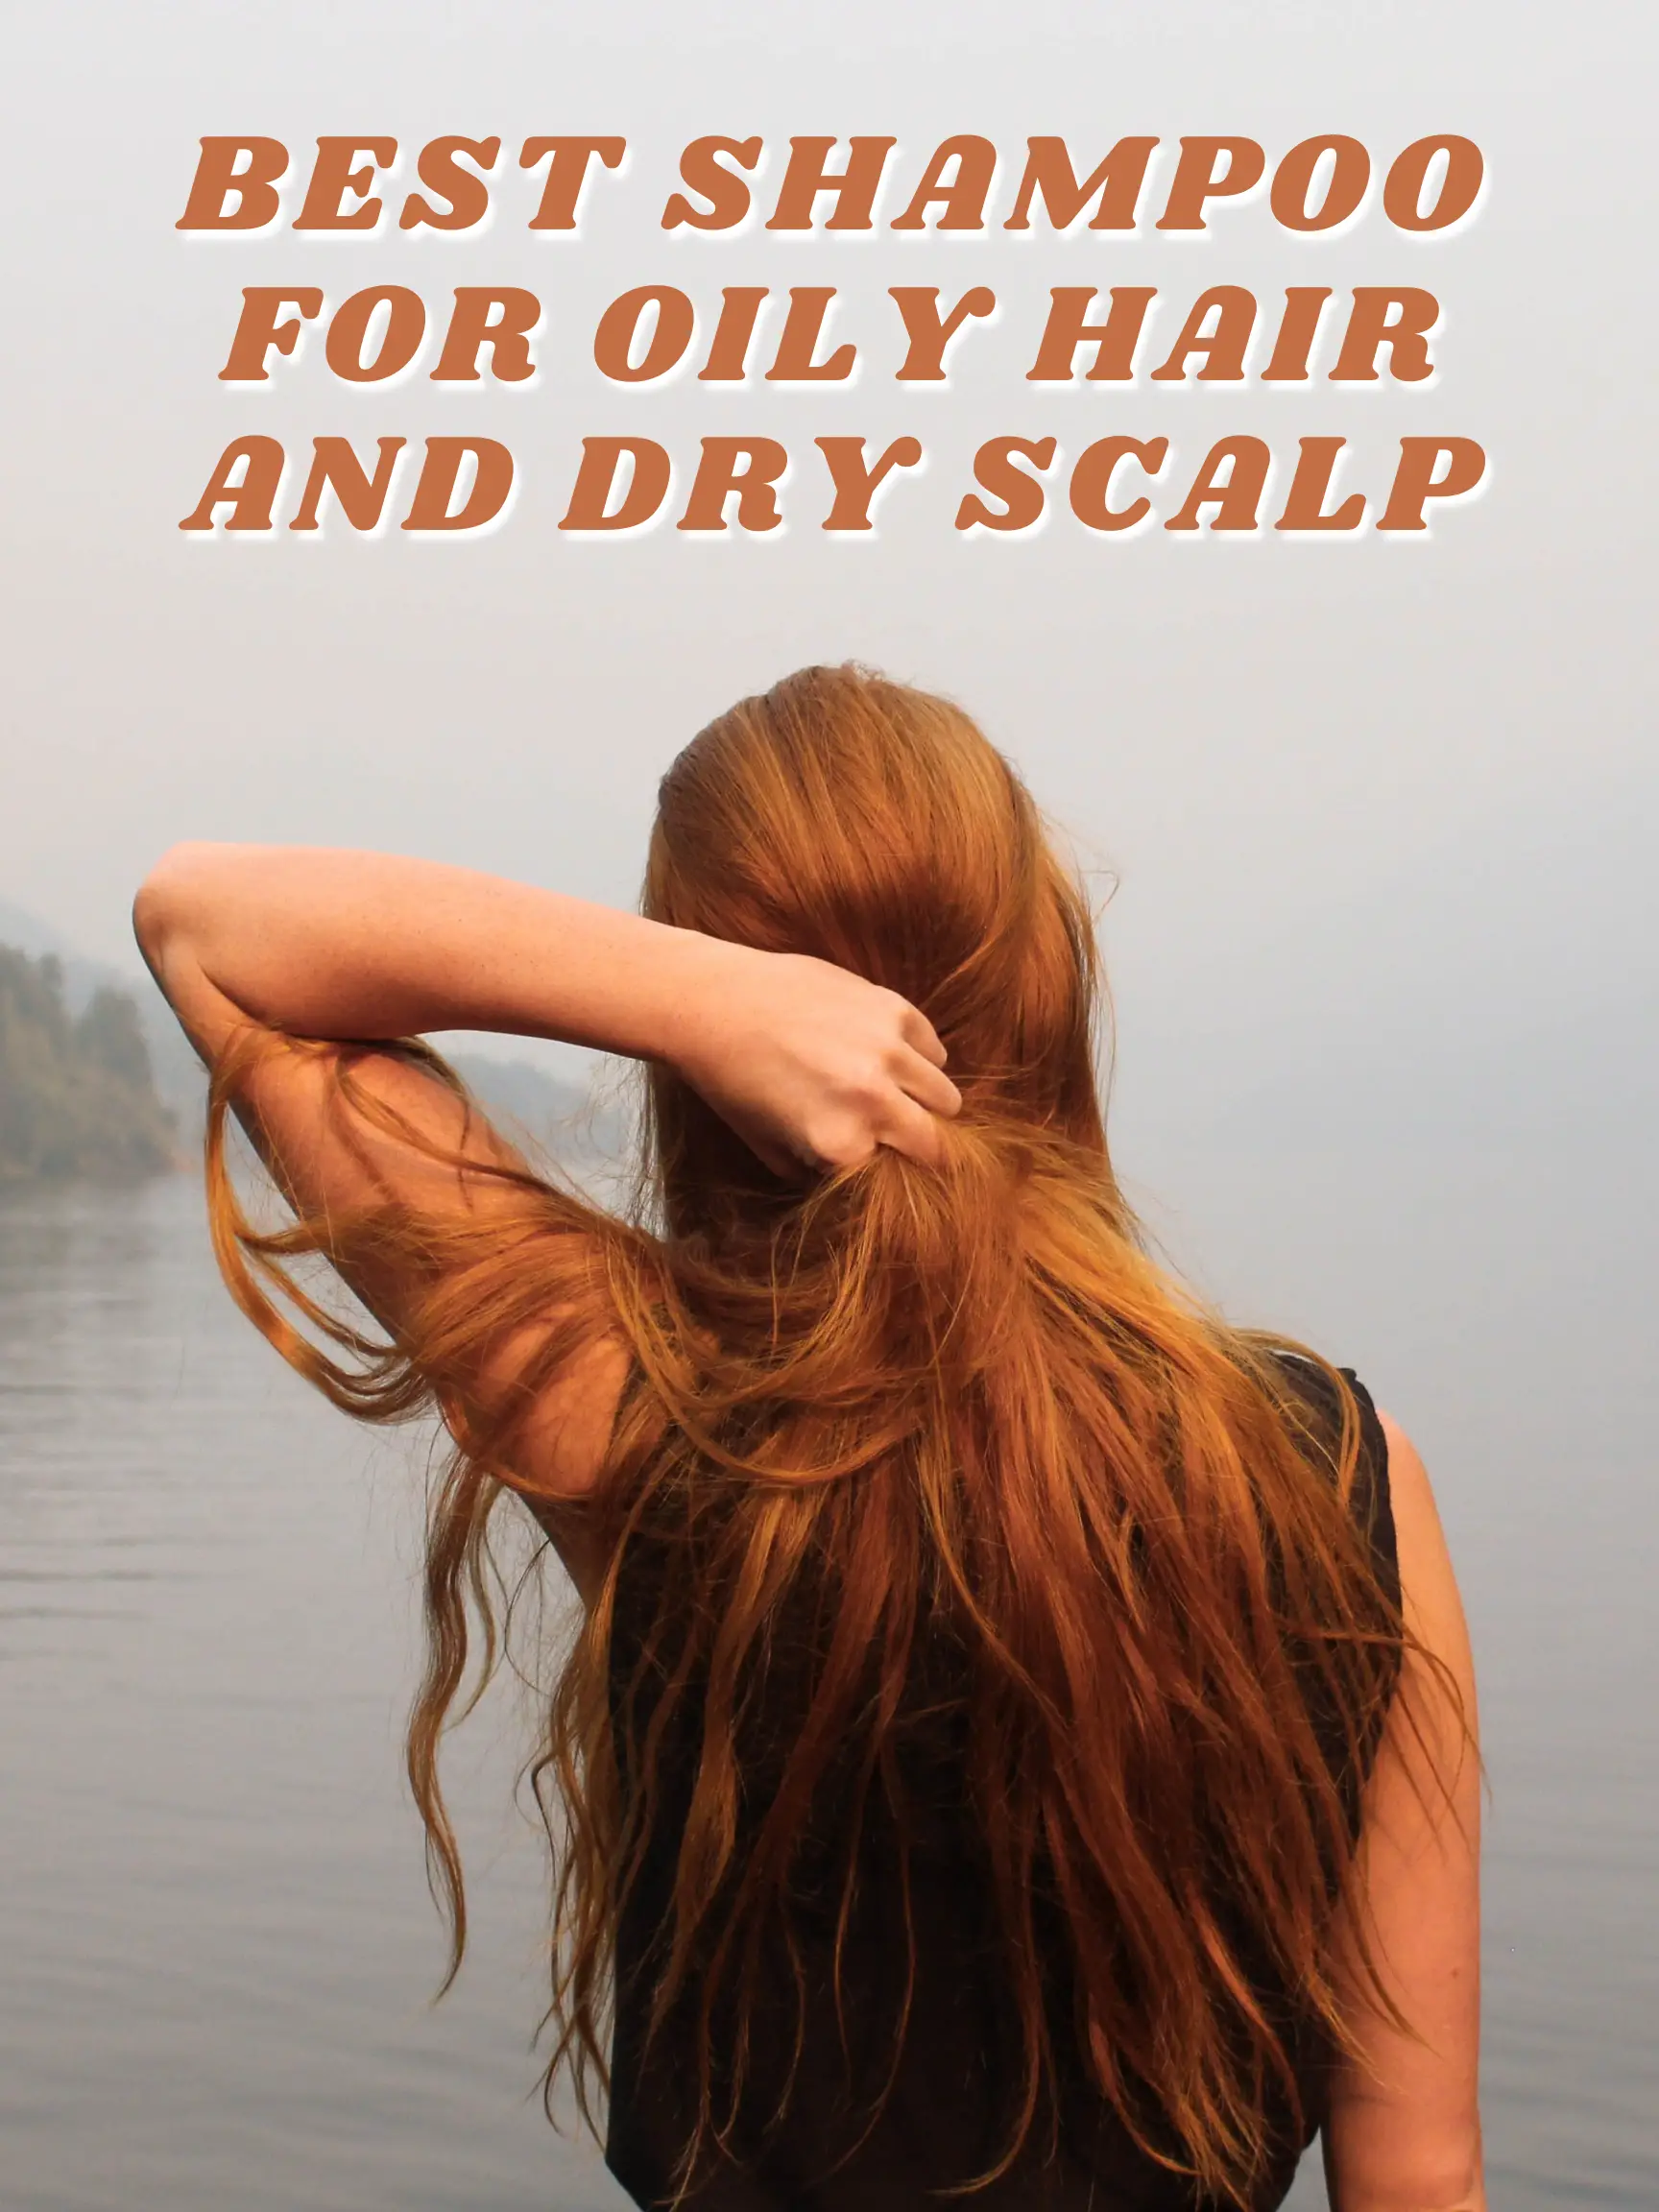 Oily Hair and Dry Scalp